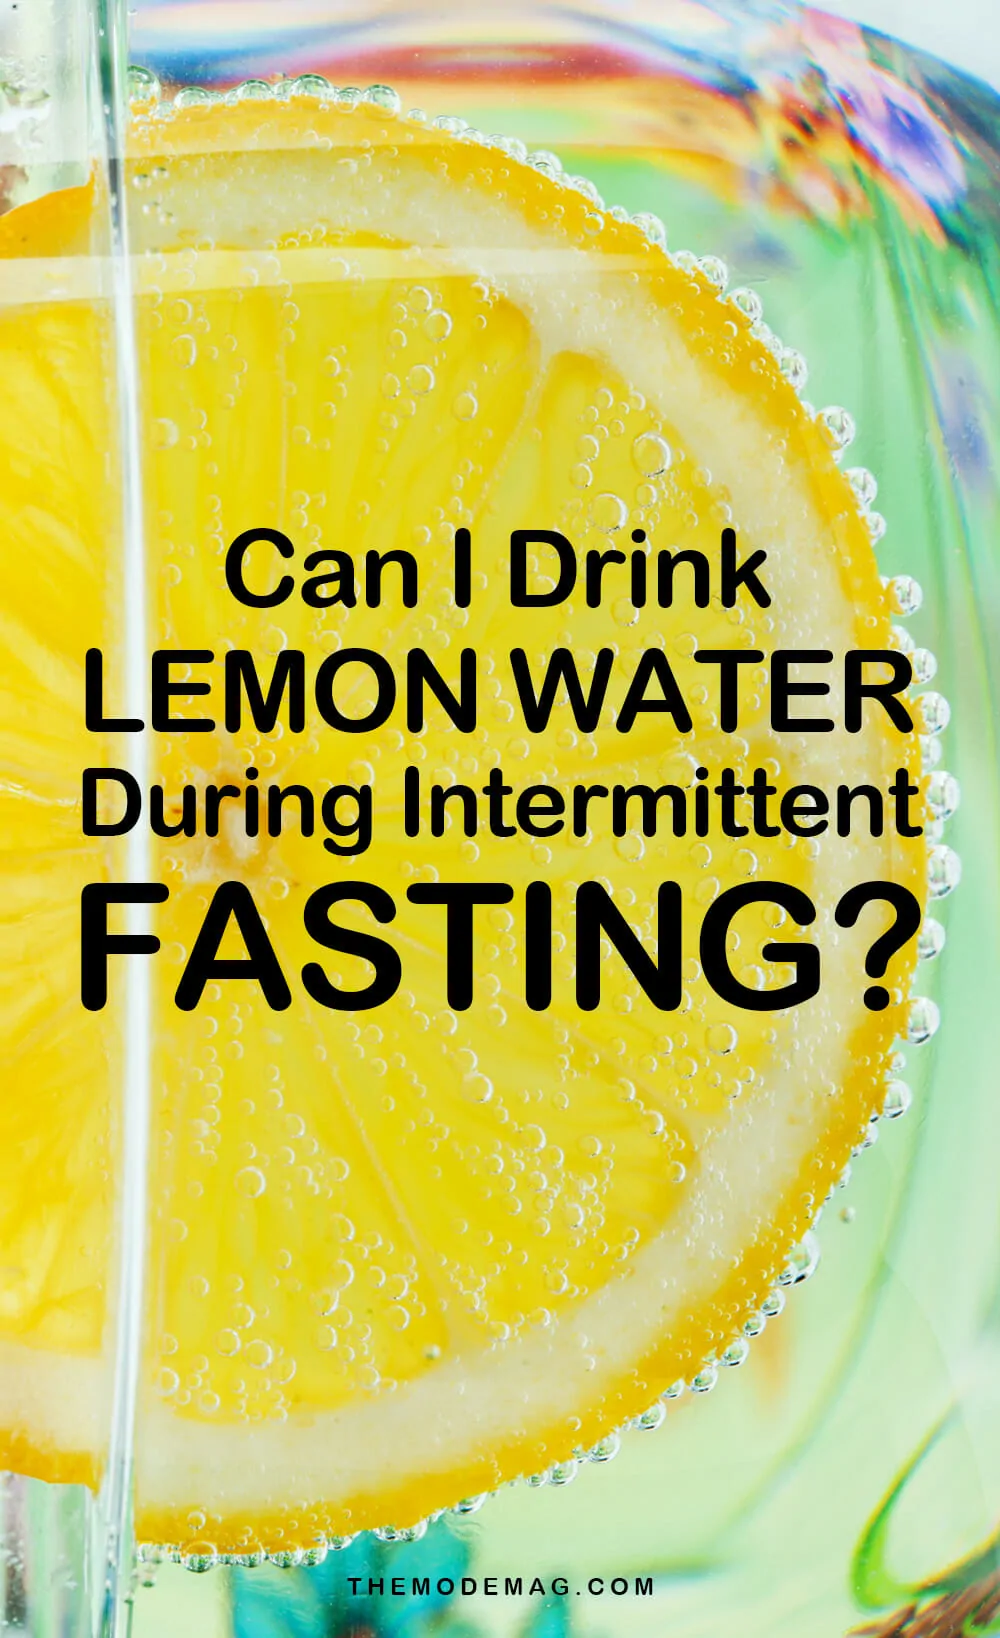 Can I Drink Lemon Water During Intermittent Fasting?